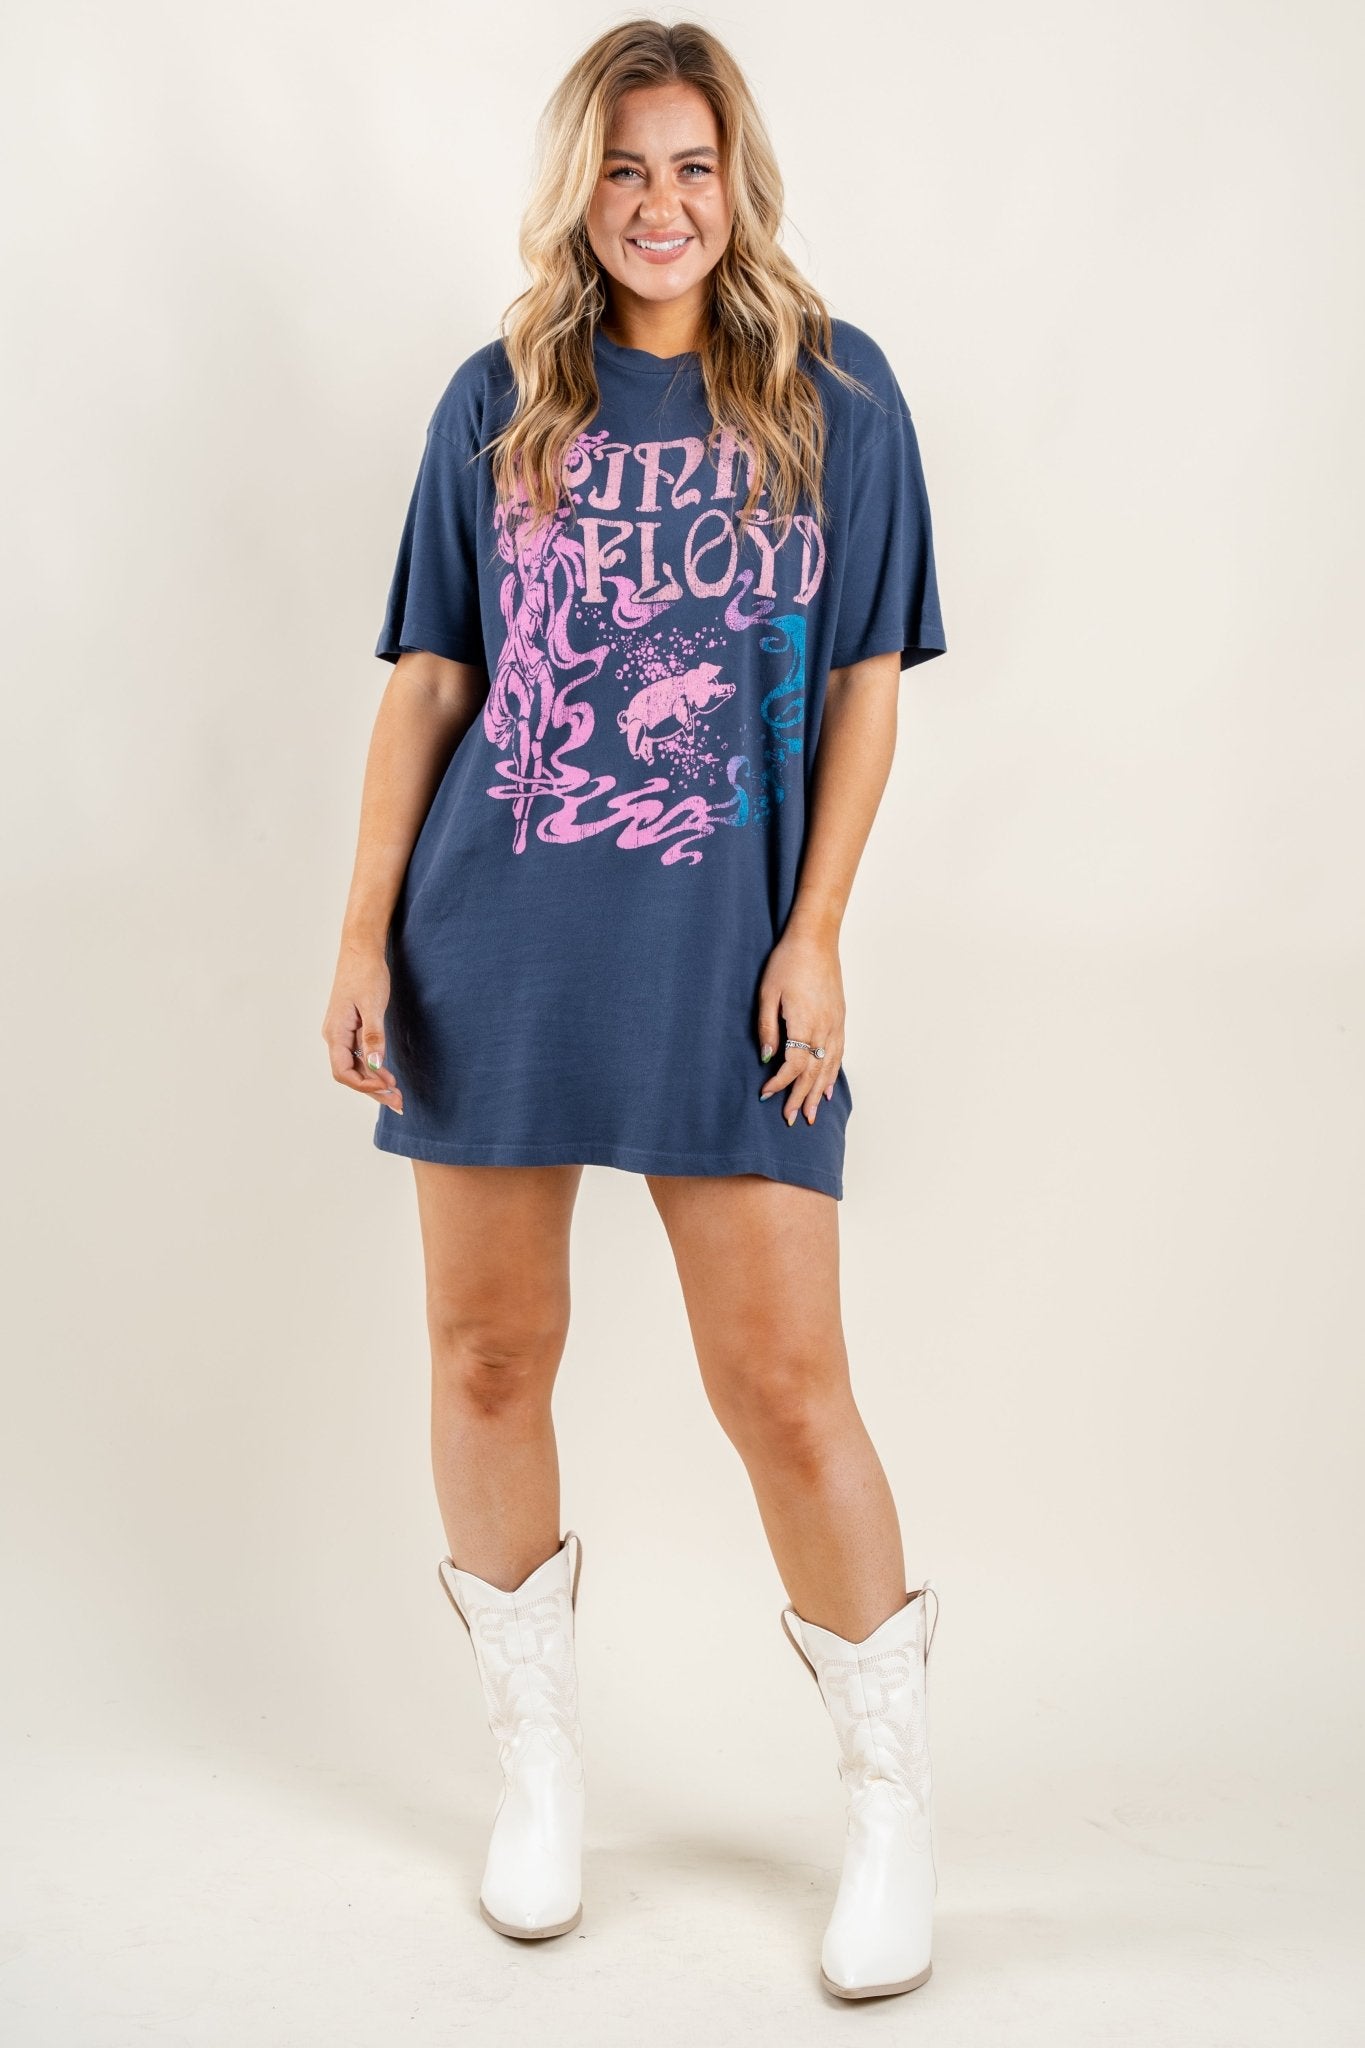 DayDreamer Pink Floyd t-shirt dress navy - DayDreamer Clothing at Lush Fashion Lounge Trendy Boutique in Oklahoma City